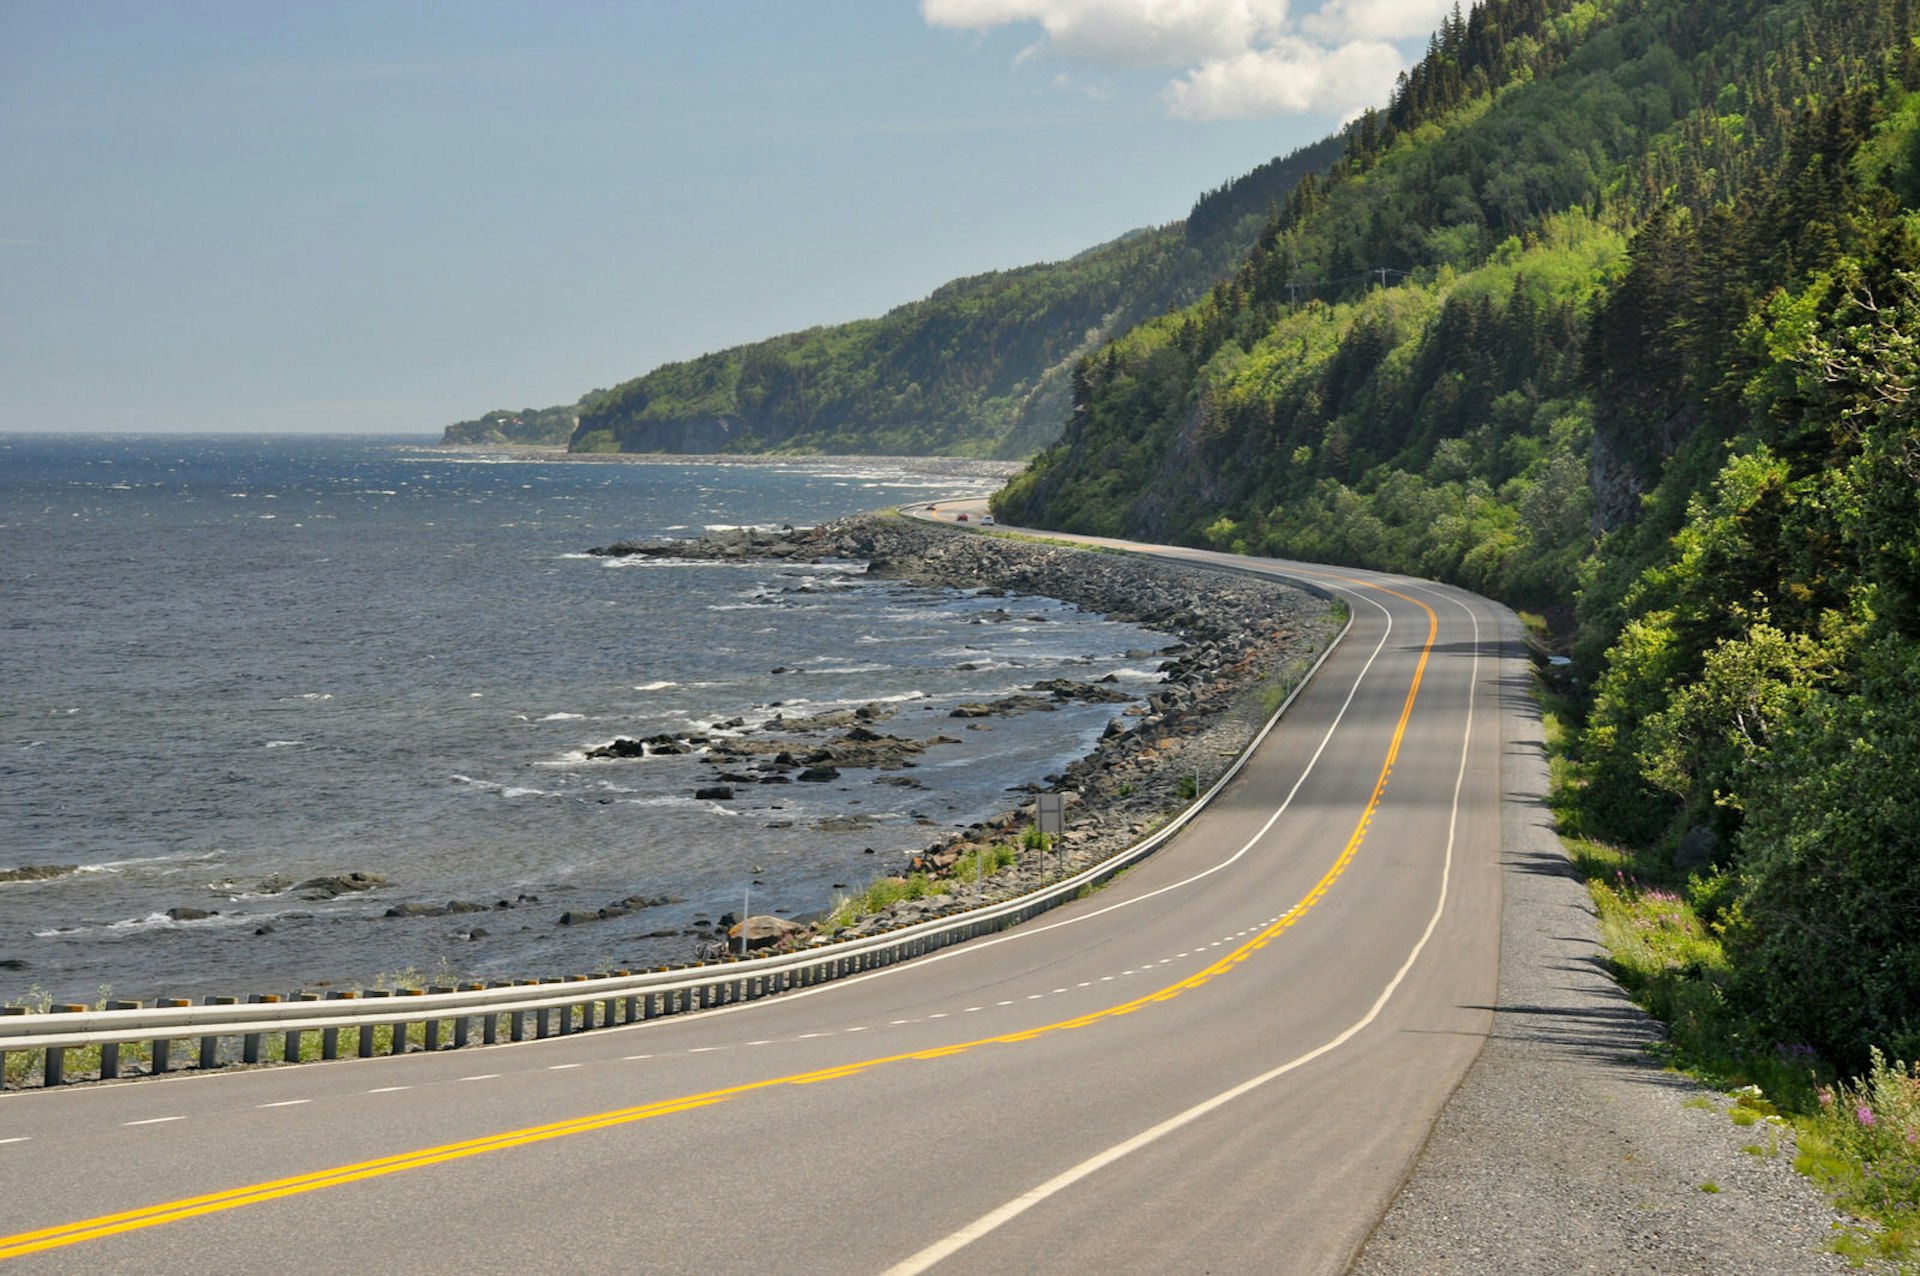 Highway 132 at the coast of Saint Lawrence River – one of the most scenic stretches of the Gaspésie Tour © Mrpluck / Getty Images